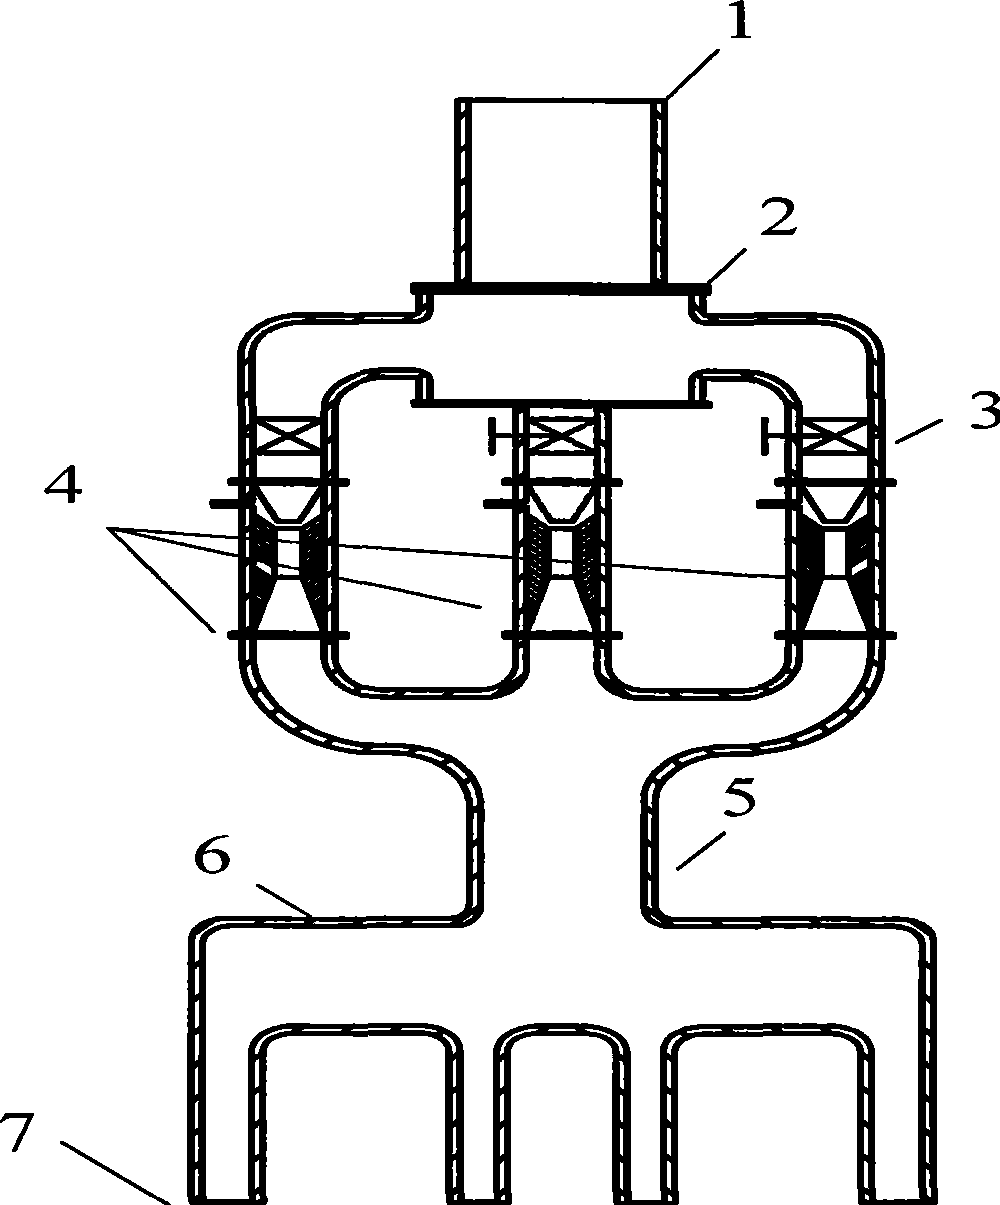 Flotation cell without transmission